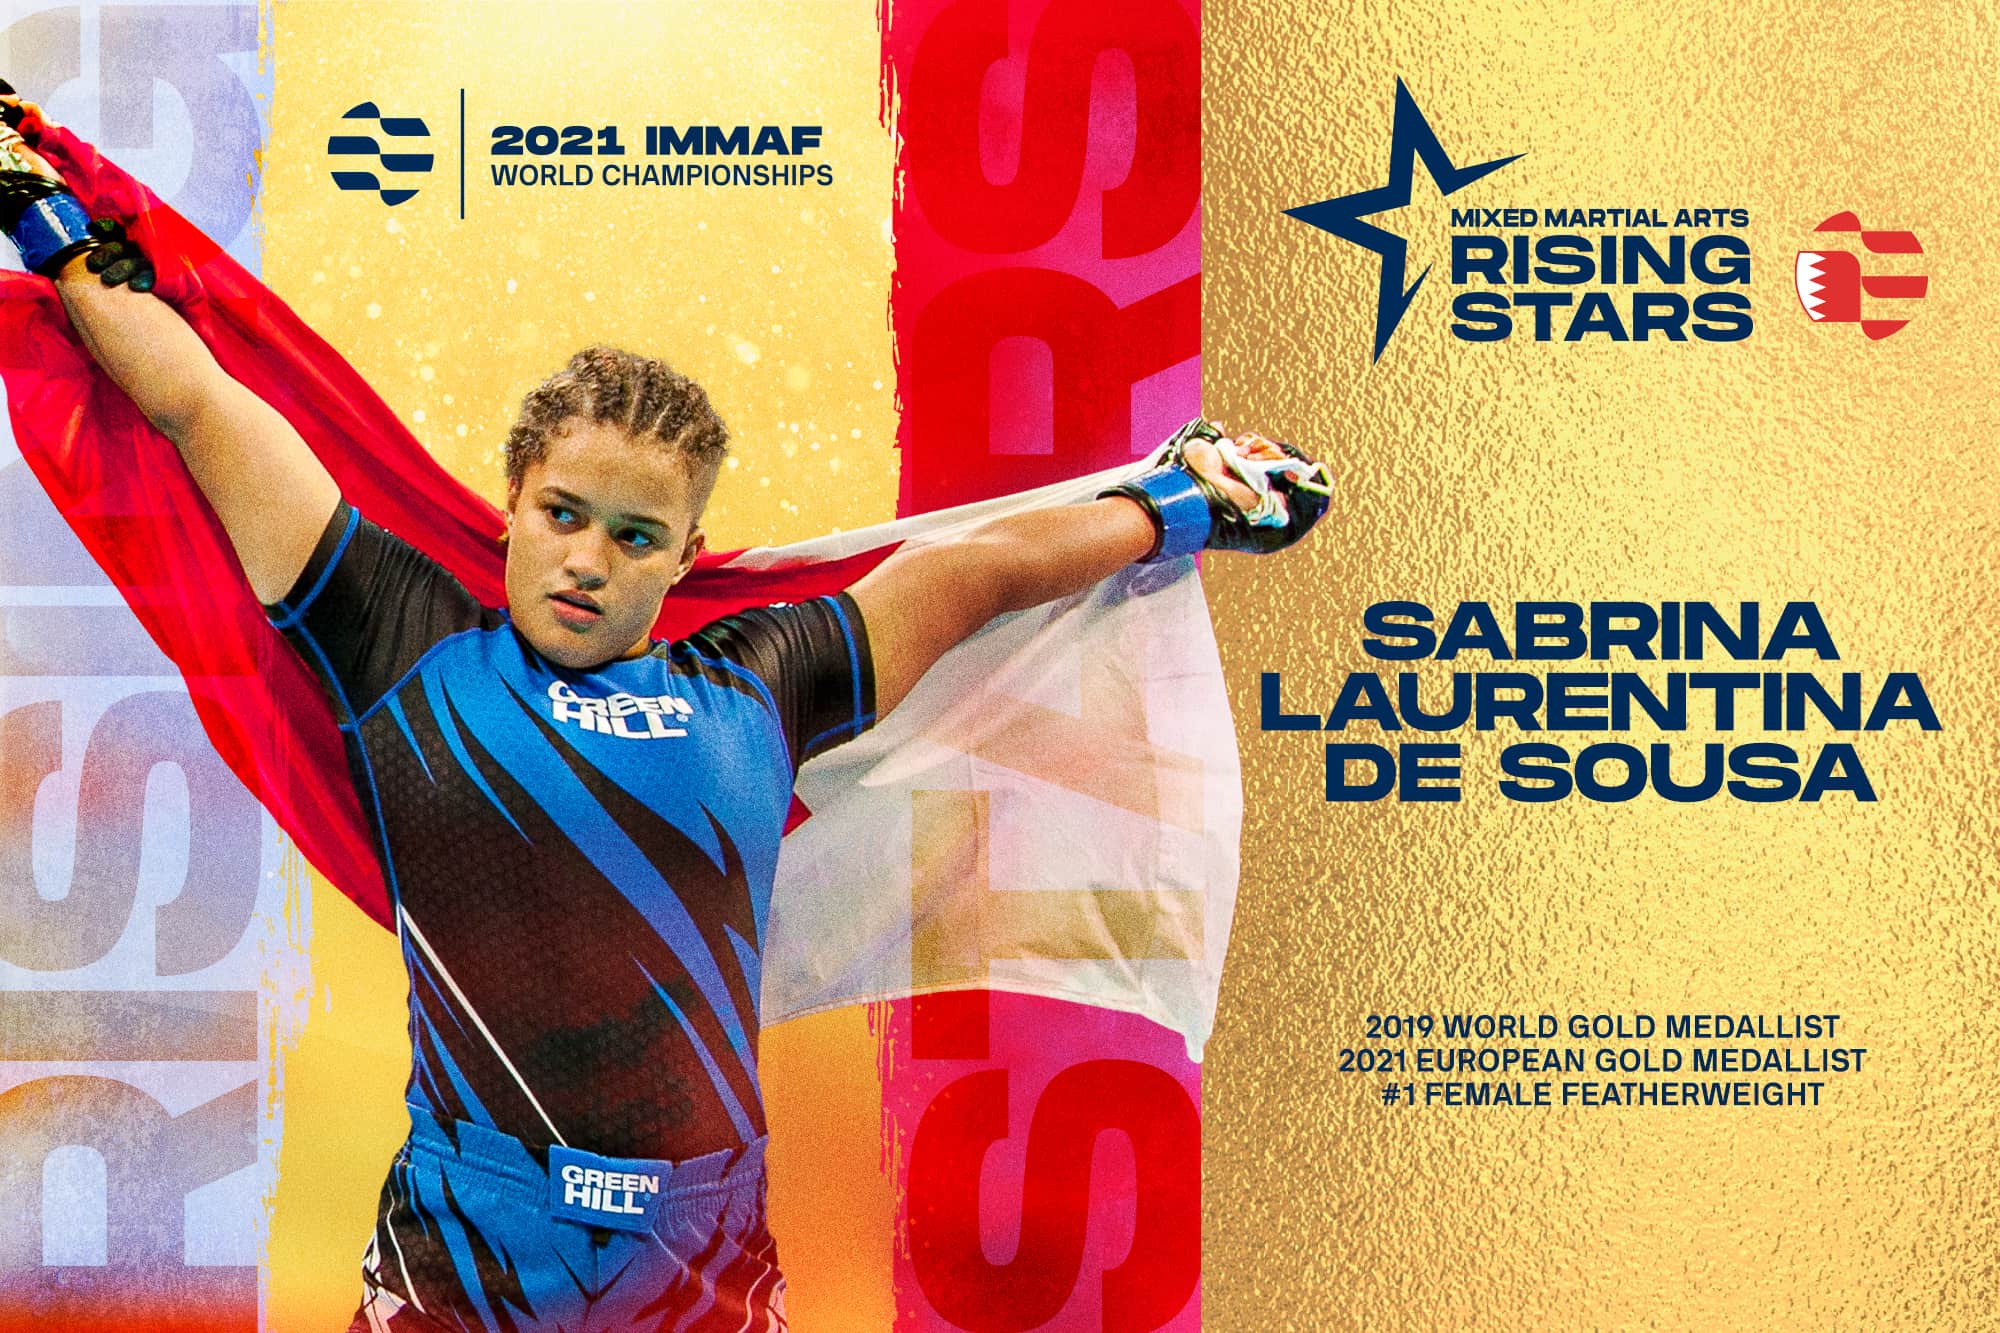 Rising Star De Sousa Prepares for Title Defence at IMMAF Worlds